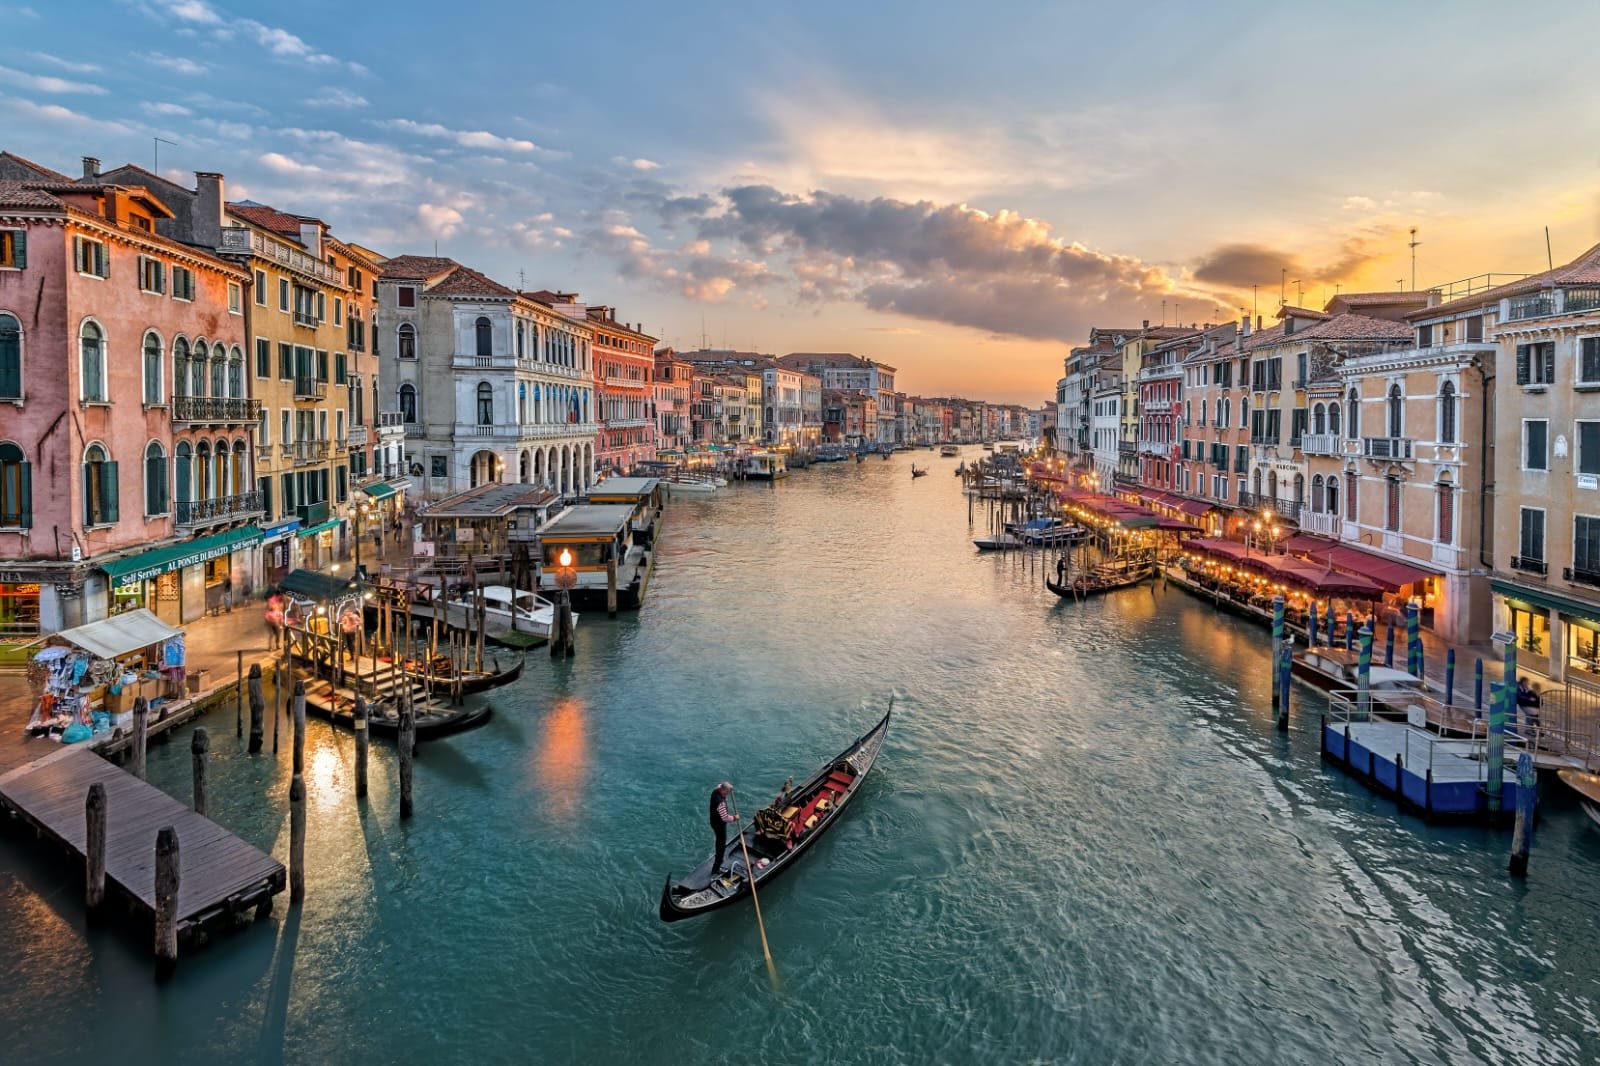 Day 10: Welcome To Venice - The Floating City Of Italy. Enjoy Gondola Ride.